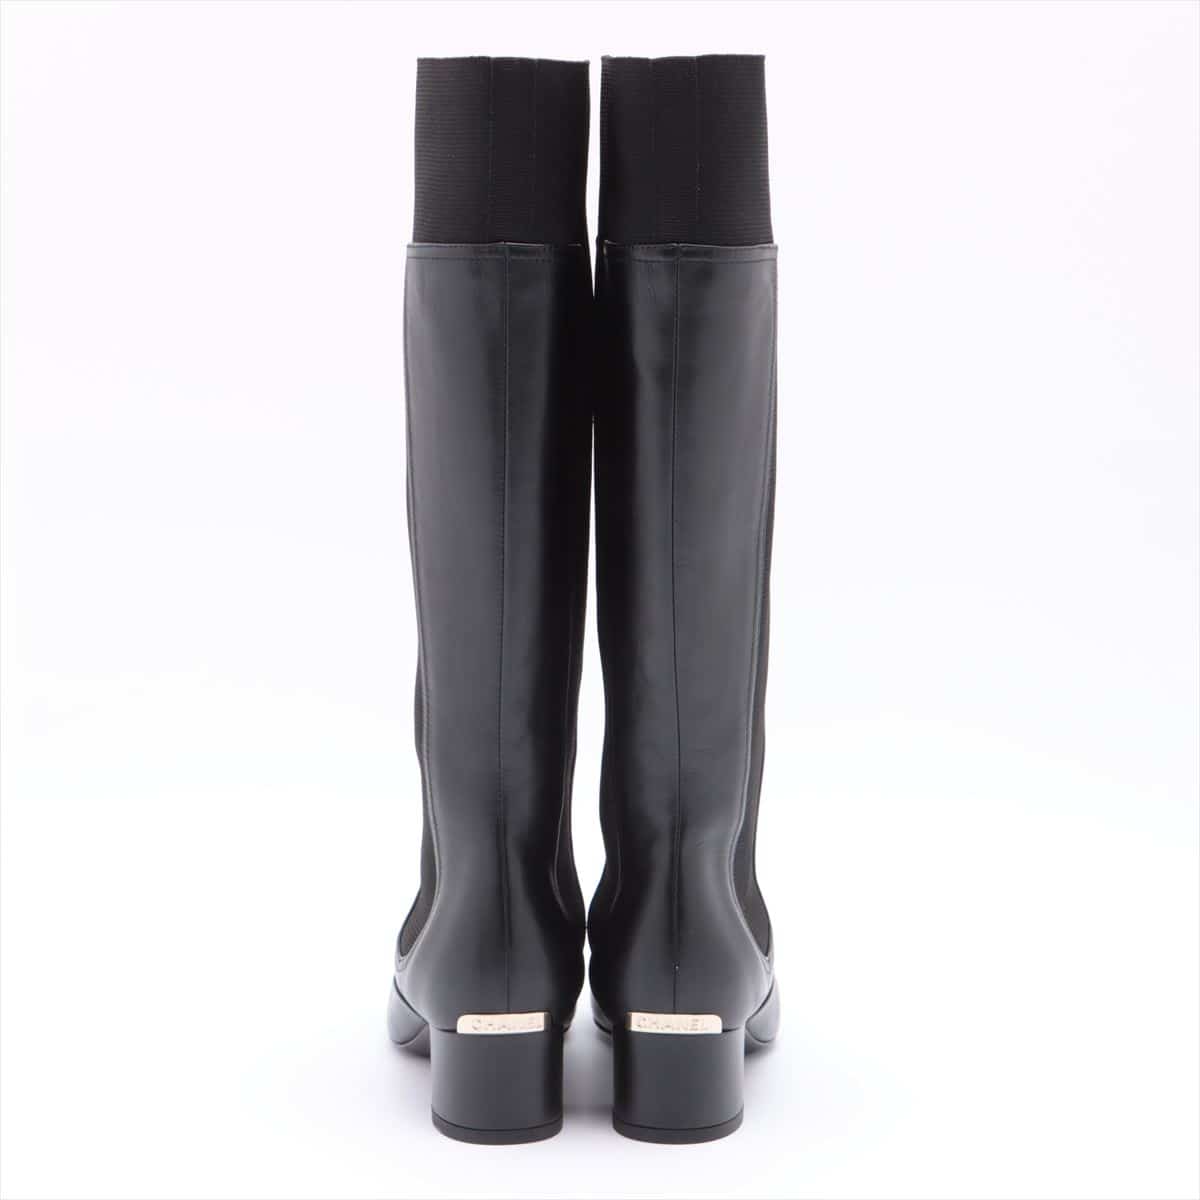 Chanel Leather Long boots 35 1/2 Ladies' Black